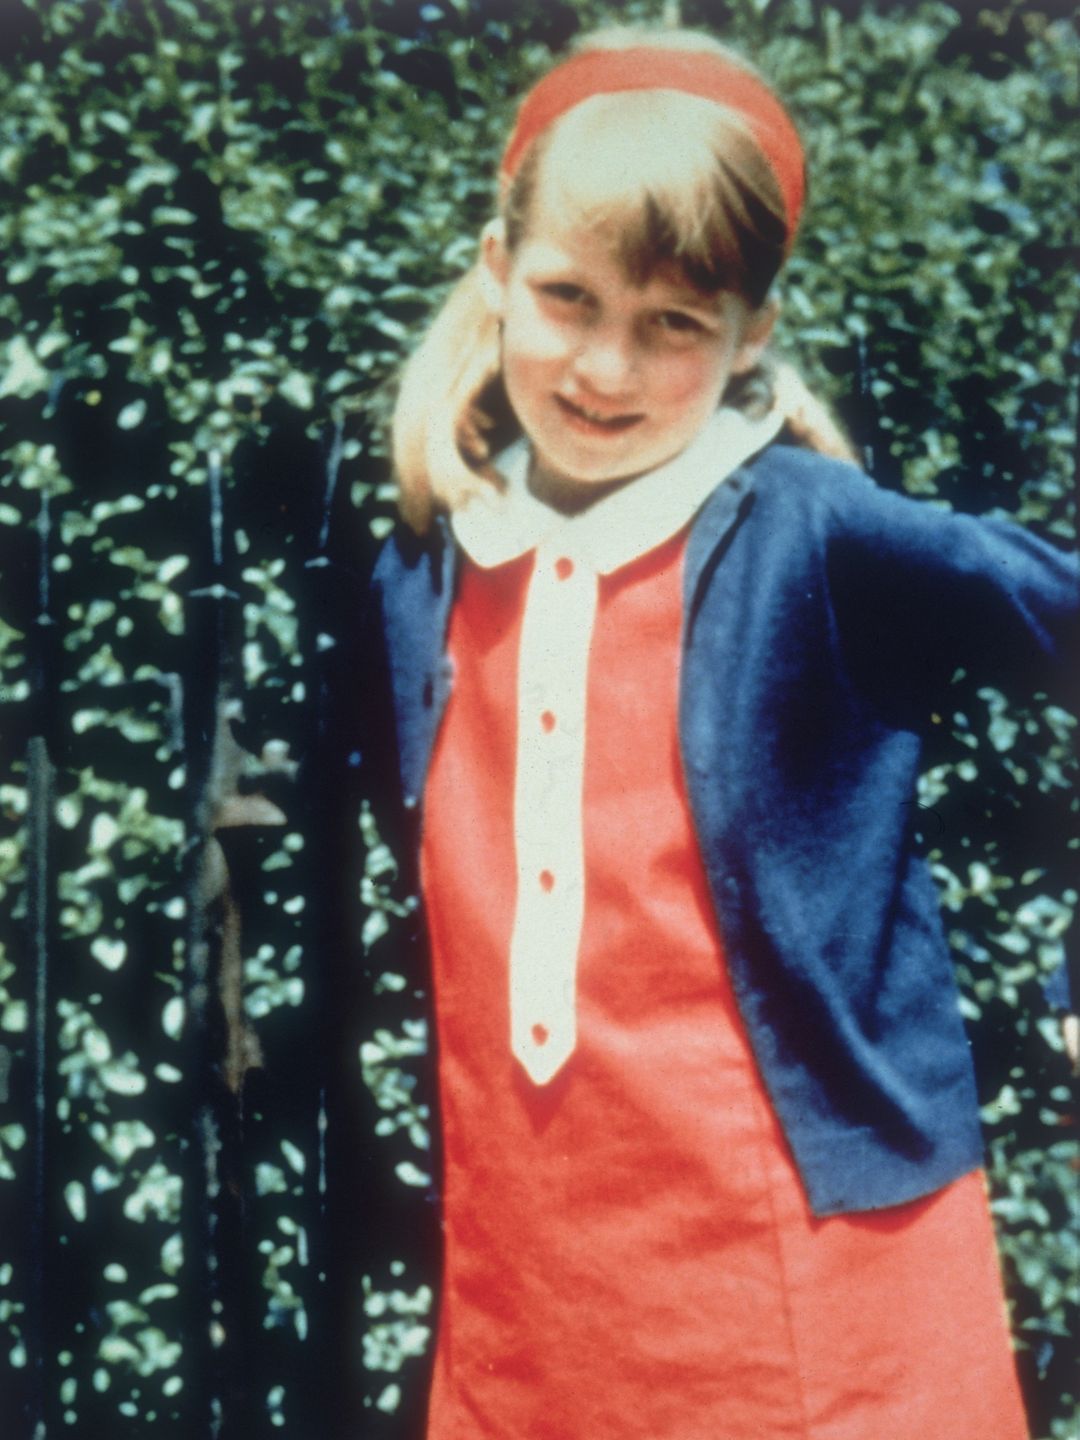 A young Princess Diana in a red dress and hairband with blue cardigan